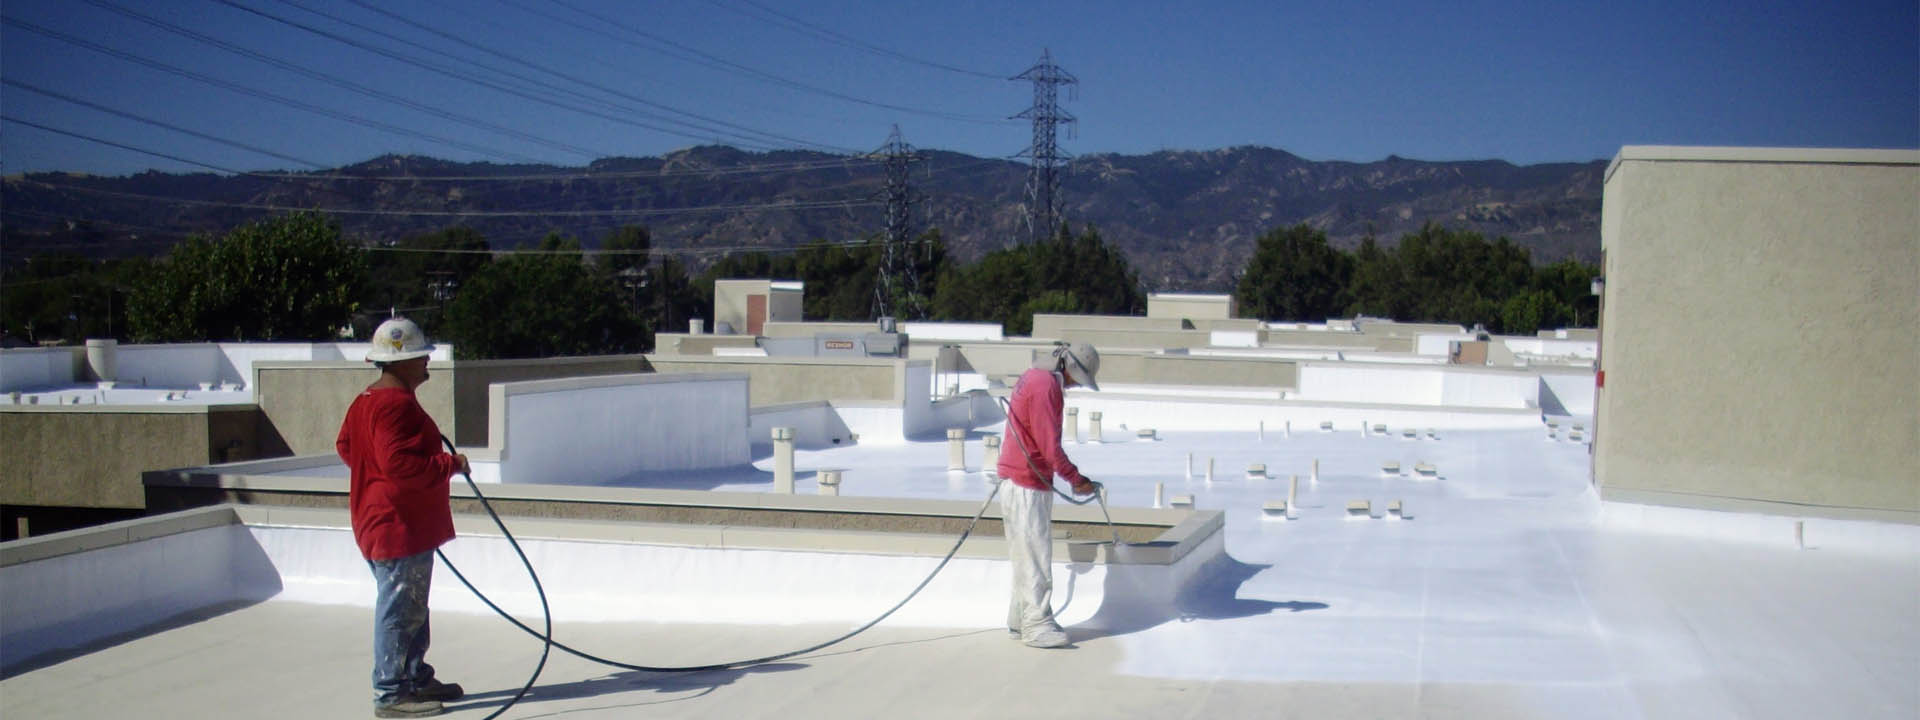 Commercial Roofing Systems Roof Coatings Stone Roofing